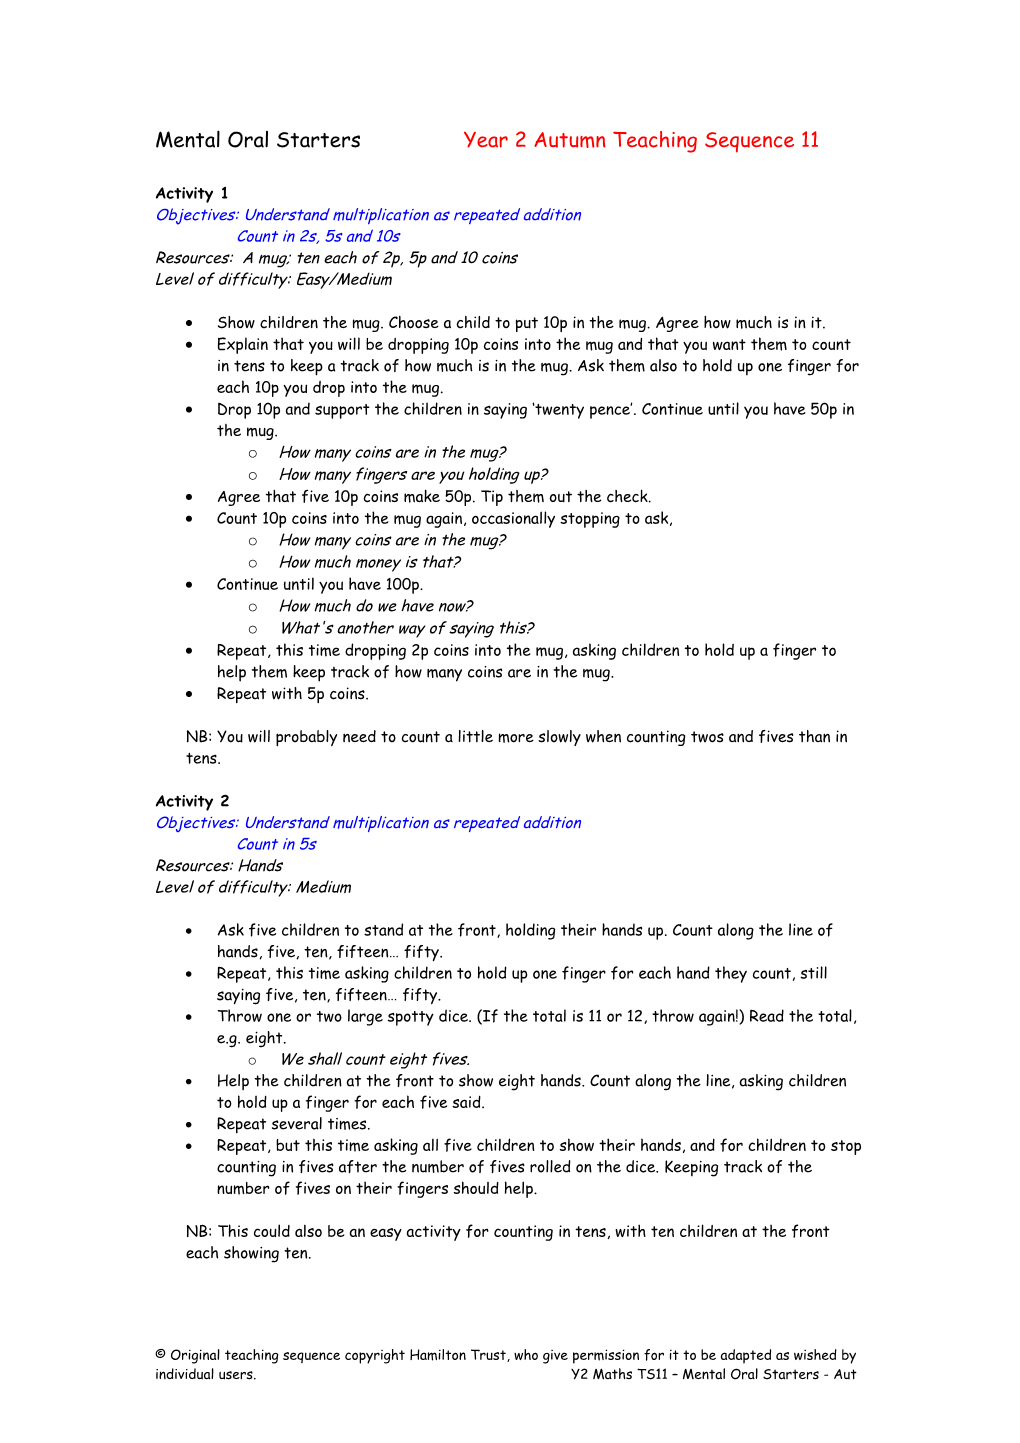 Mental Oral Starters Year 2 Autumn Teaching Sequence 11